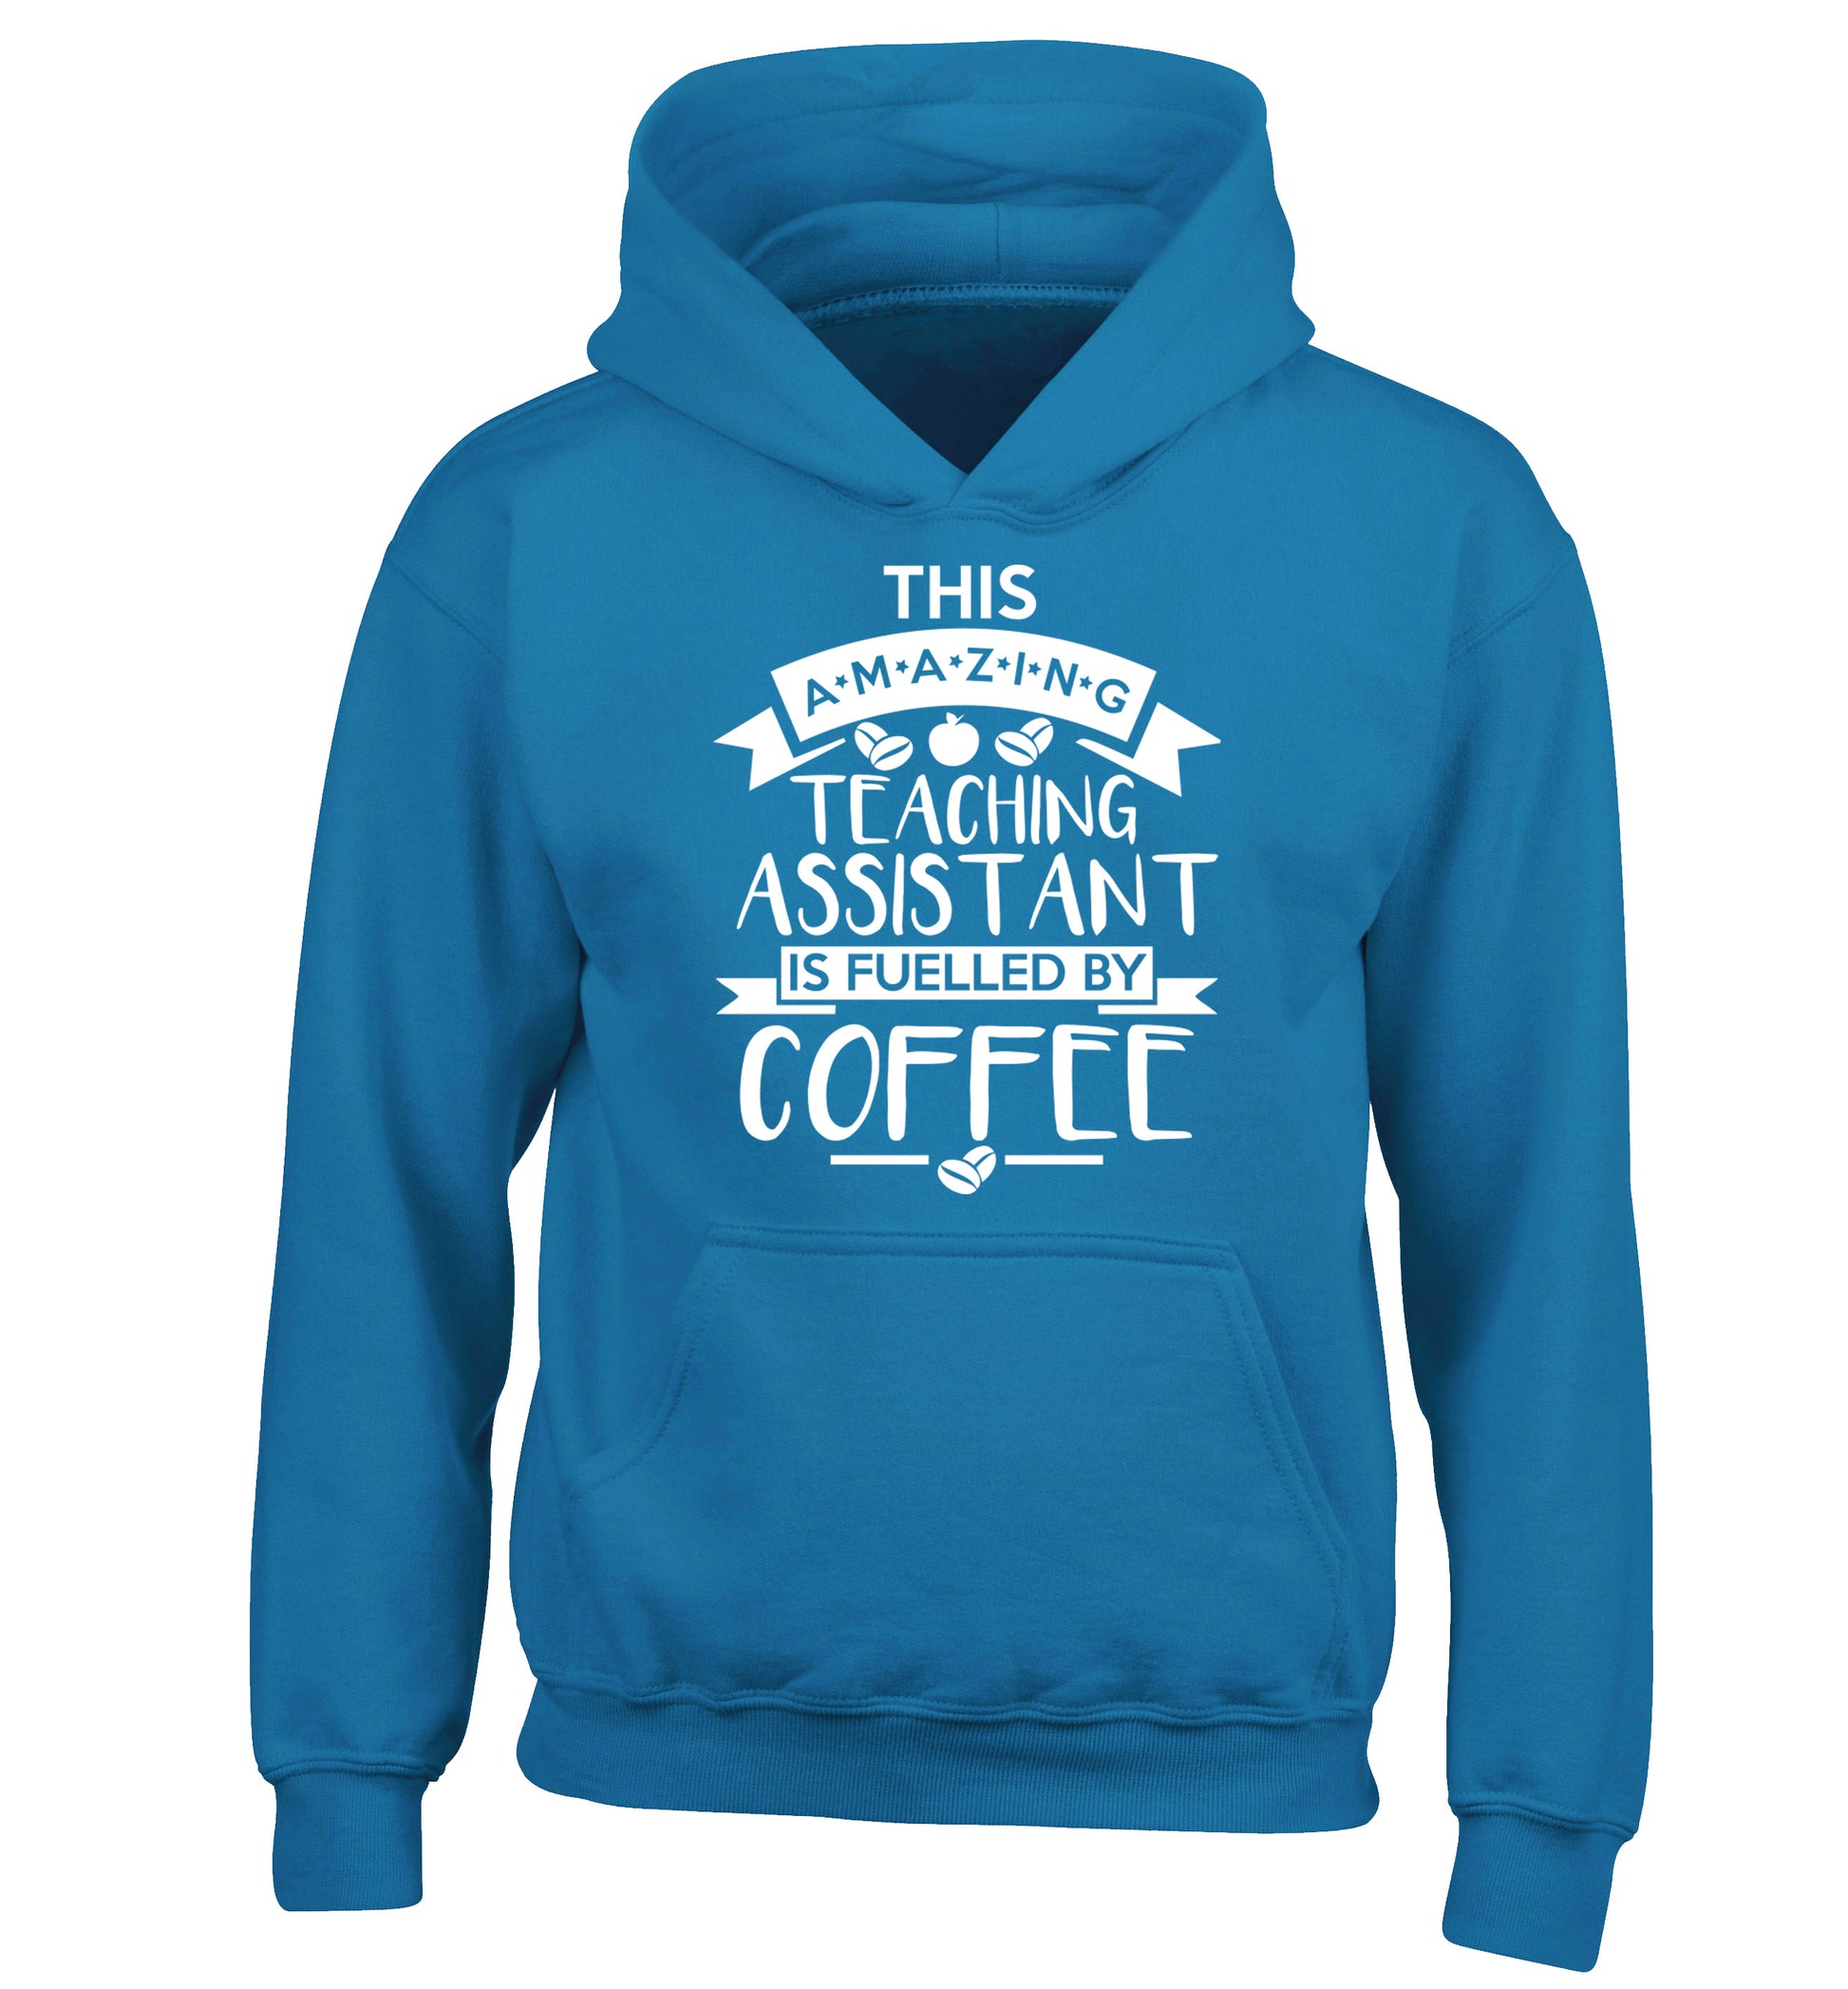 This amazing teaching assistant is fuelled by coffee children's blue hoodie 12-13 Years